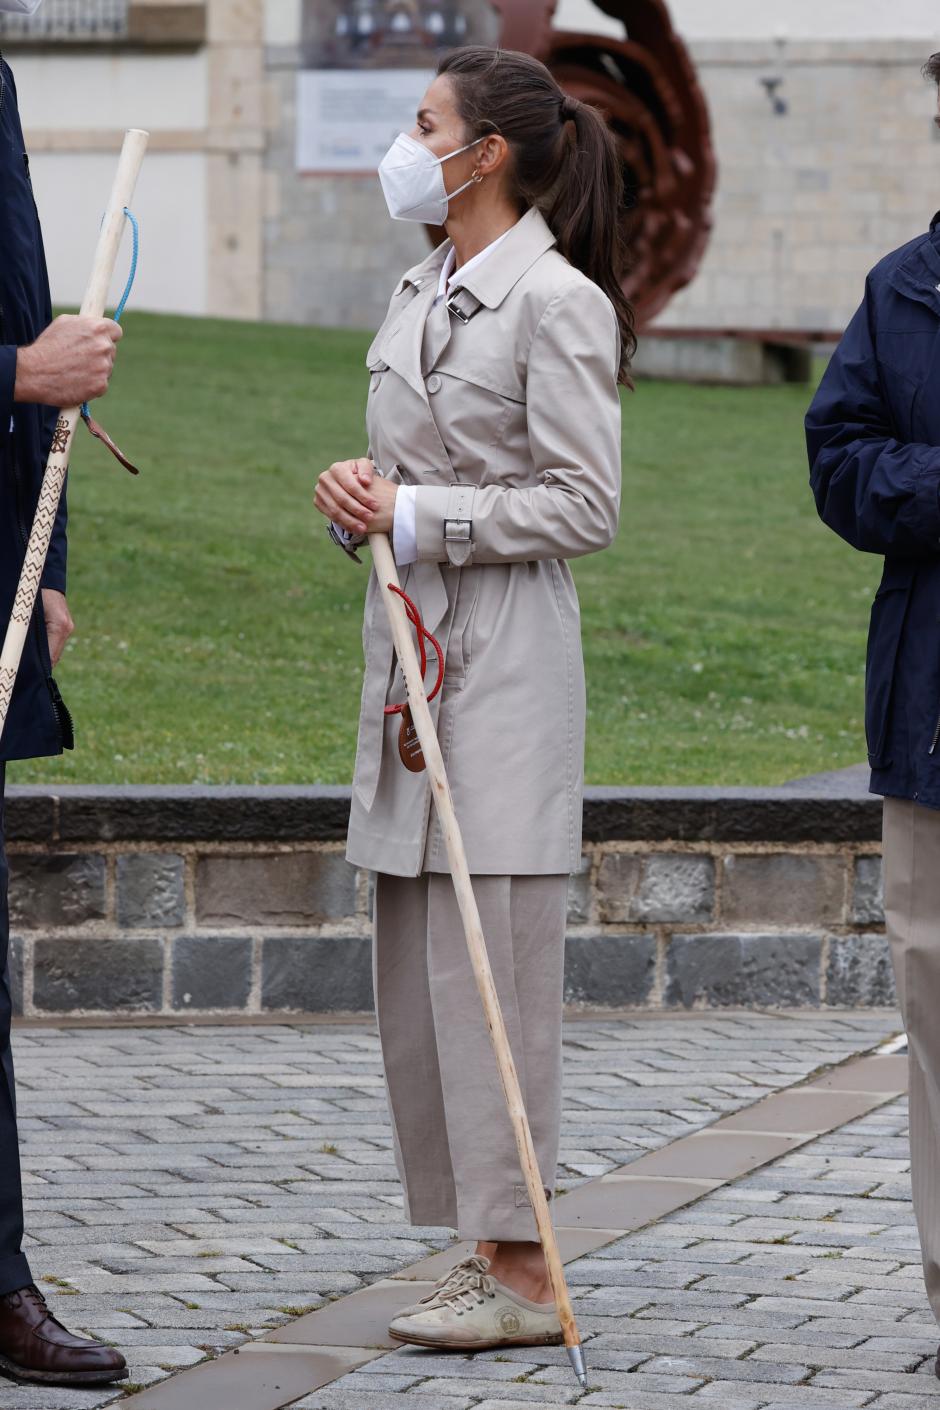 Spanish Queen Letizia during commemoration act jacobeo year 2021 / 2022 in Roncesvalles, Navarra on Monday, 12 July 2021